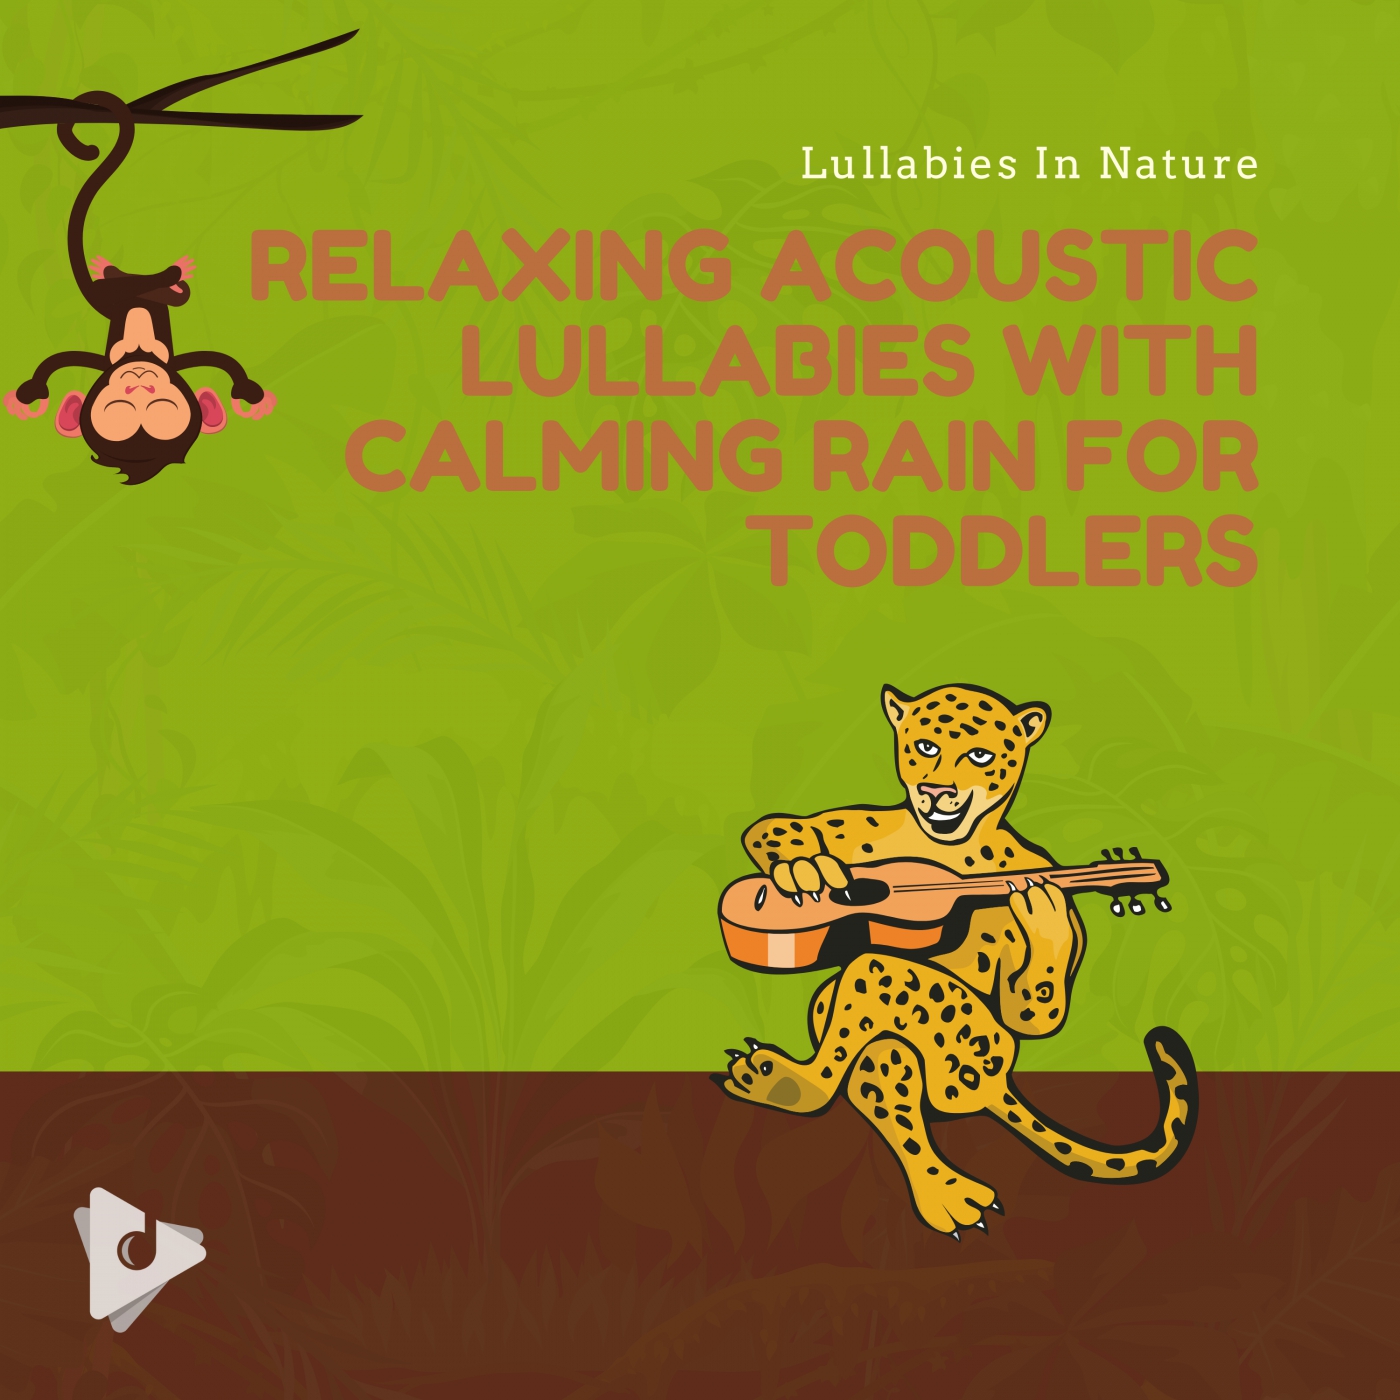 Relaxing Acoustic Lullabies with Calming Rain for Toddlers